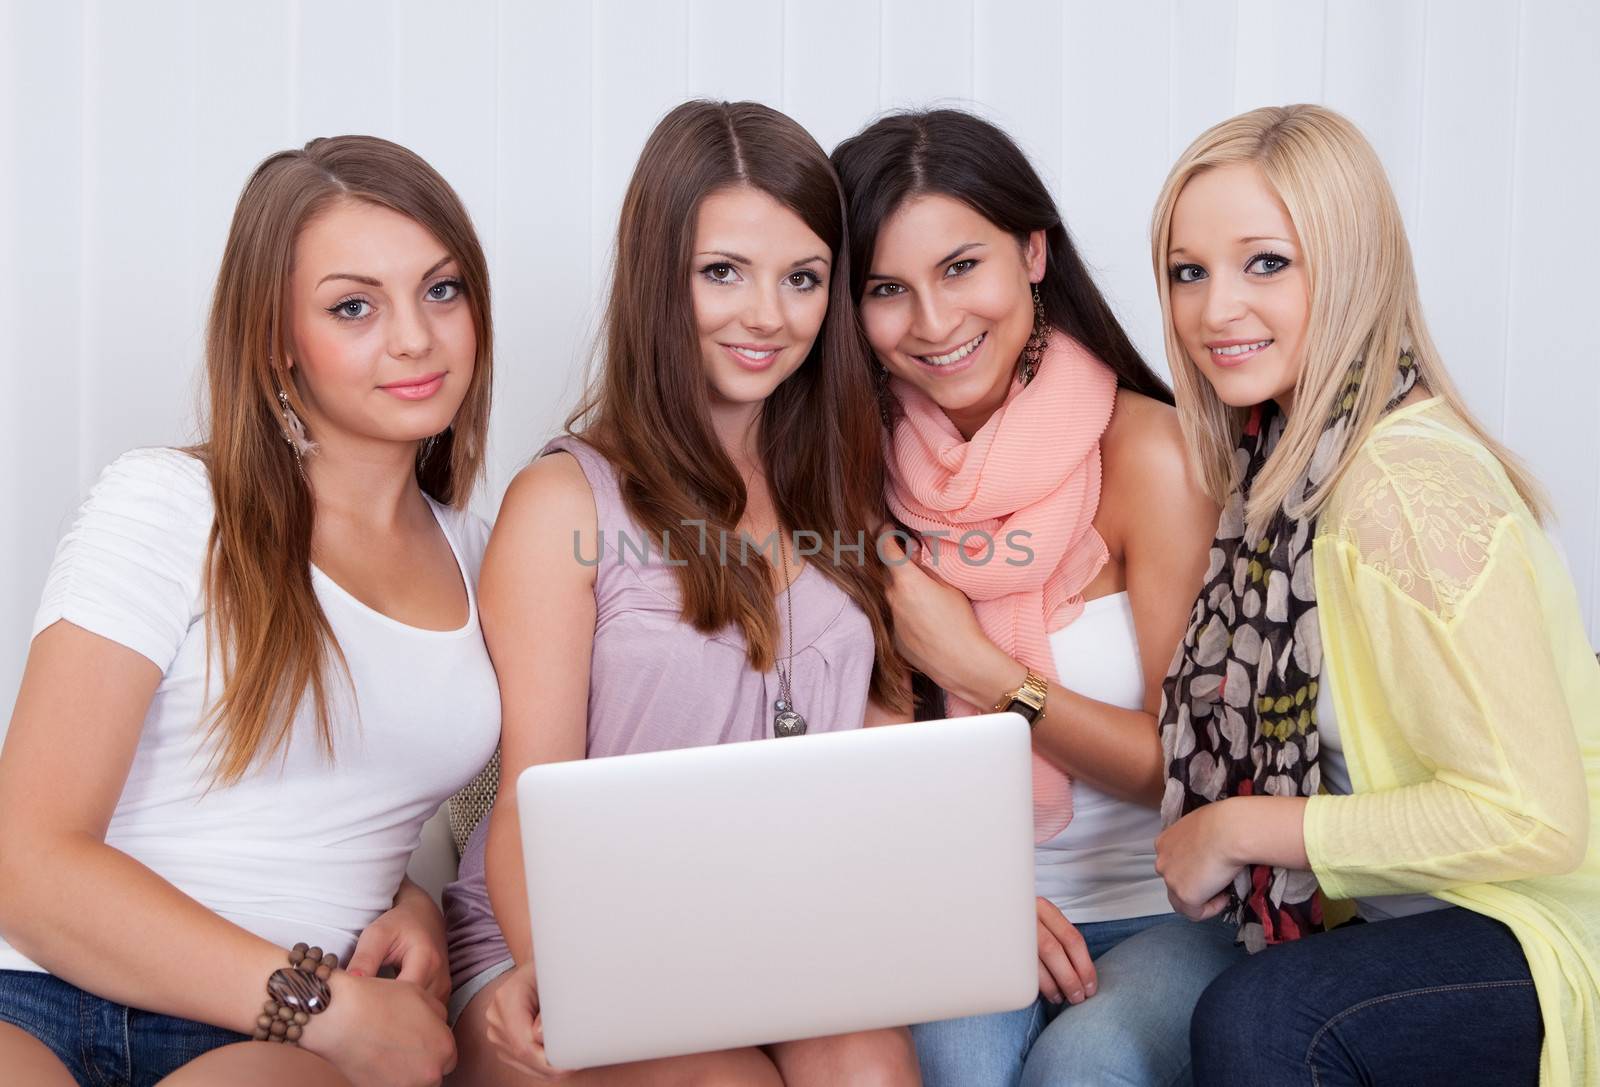 Group of beautiful young women sitting together on a couch sharing a laptop and smiling at something on the screen